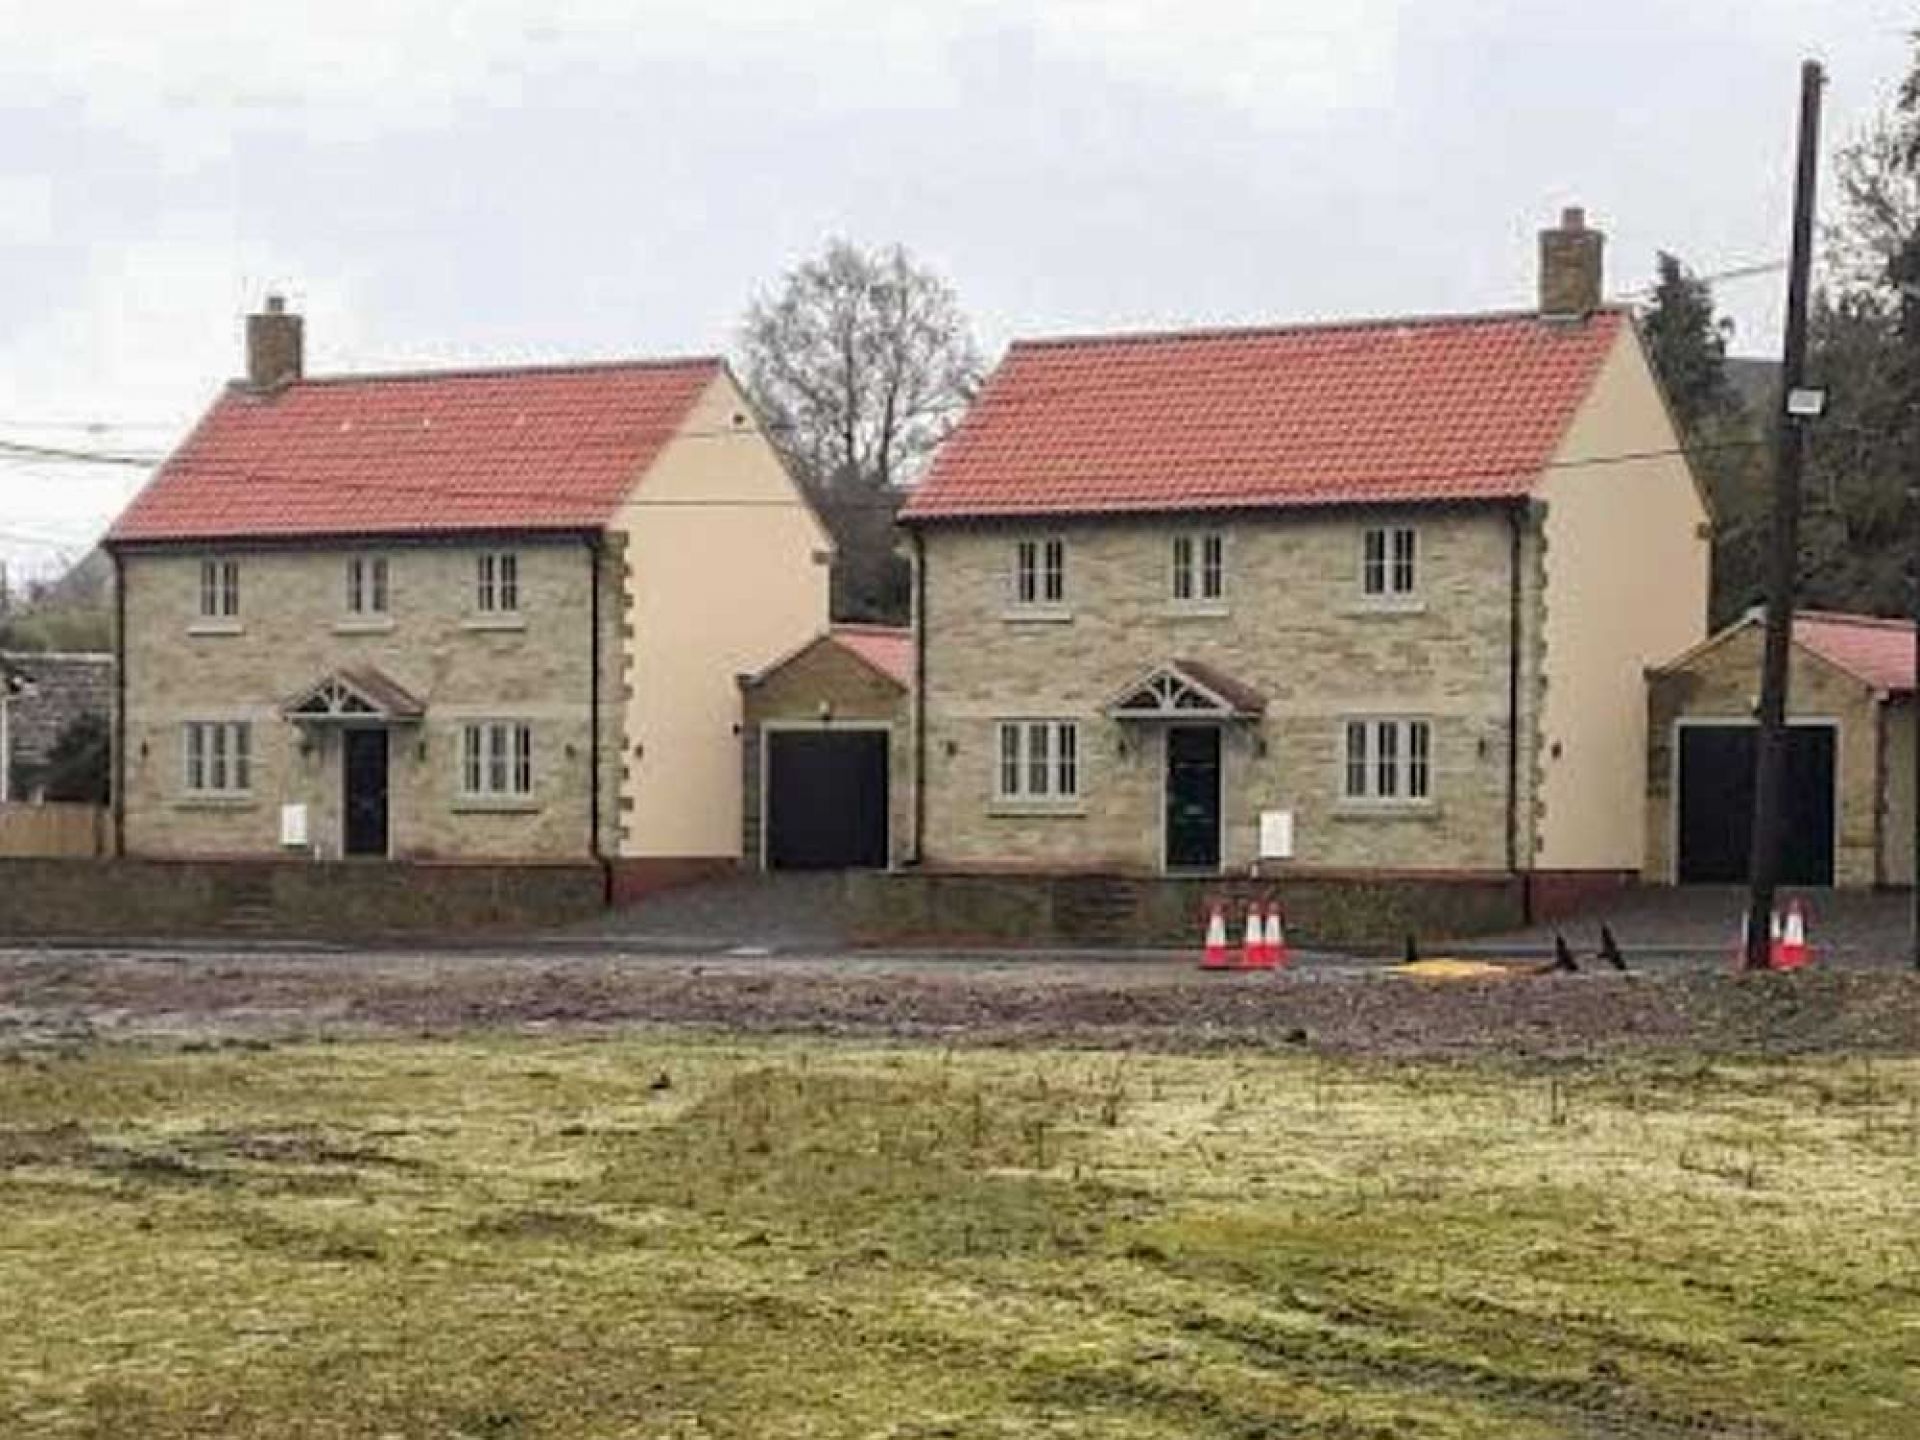 Two new detached houses.